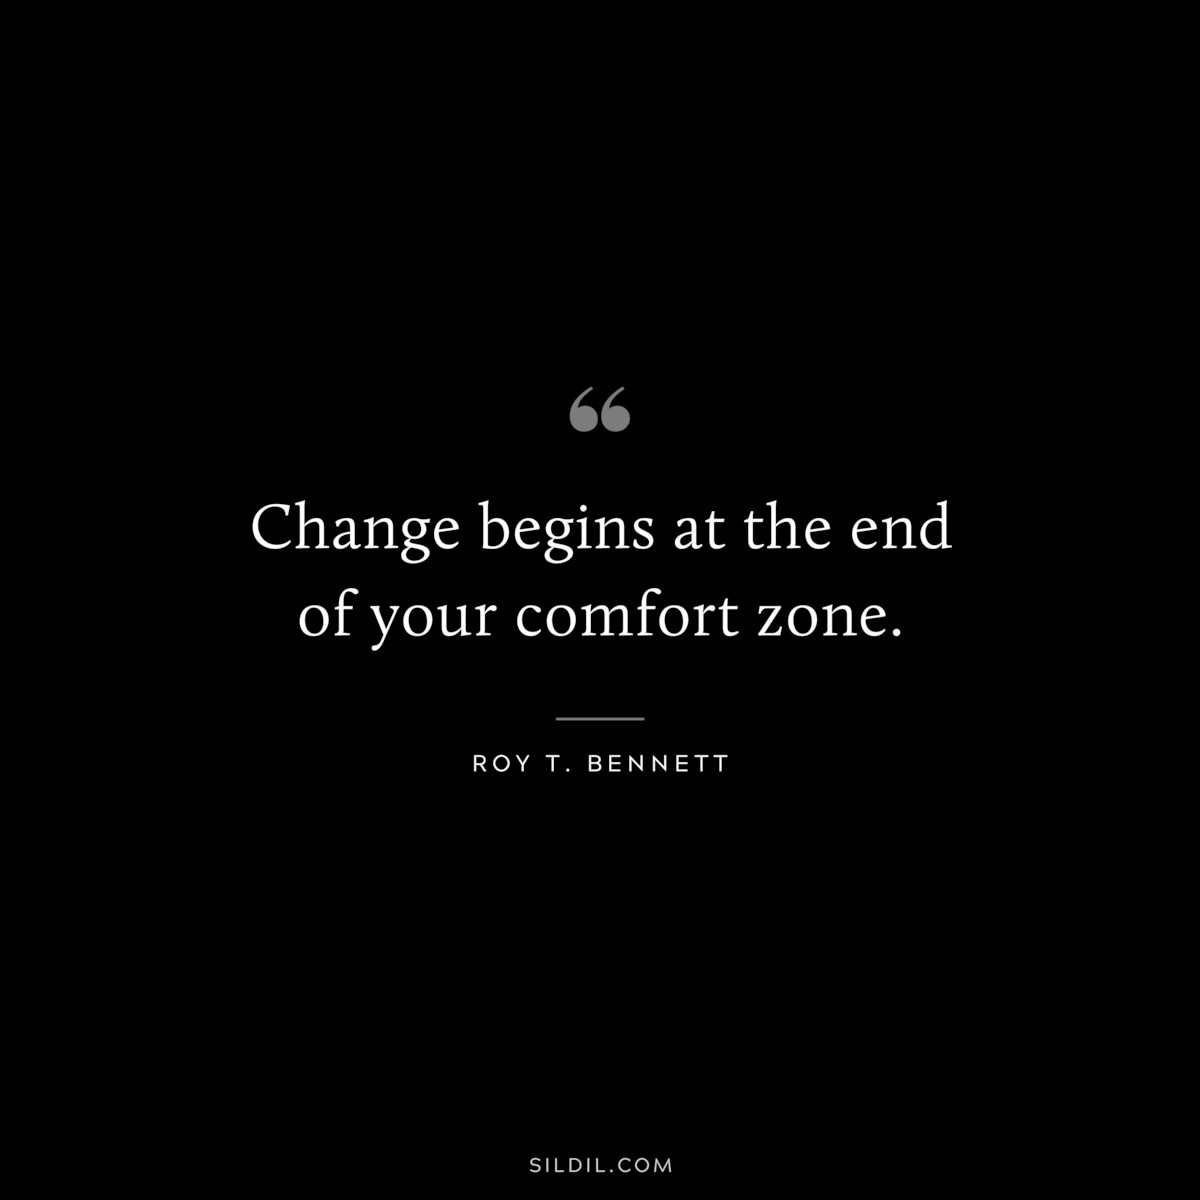 Change begins at the end of your comfort zone. ― Roy T. Bennett